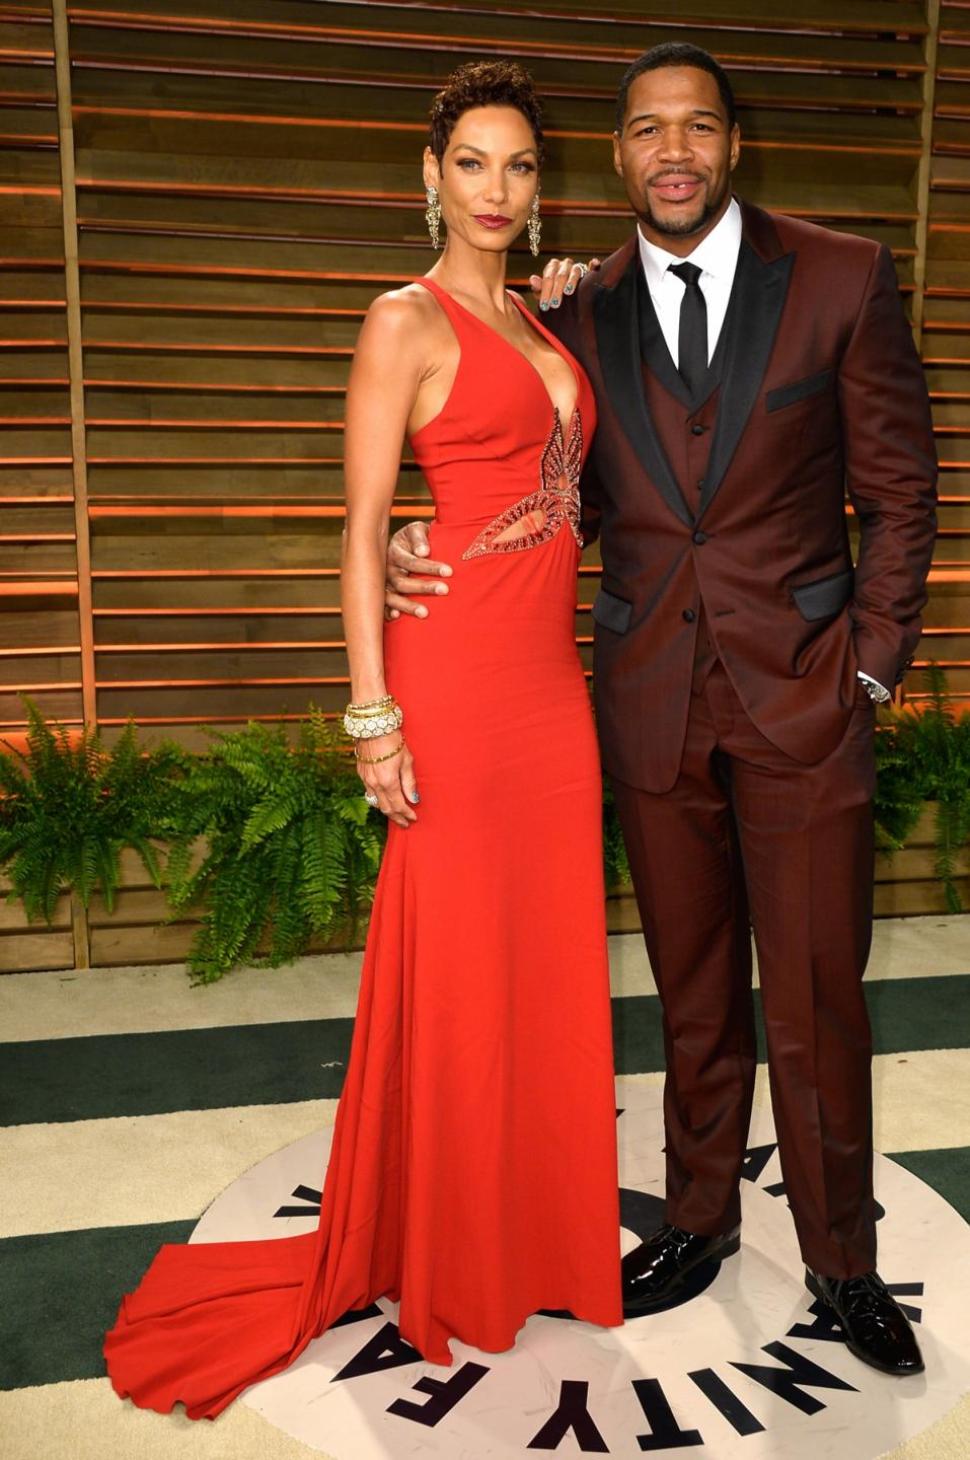 Nicole Murphy and Michael Strahan attend the 2014 Vanity Fair Oscar Party in March.